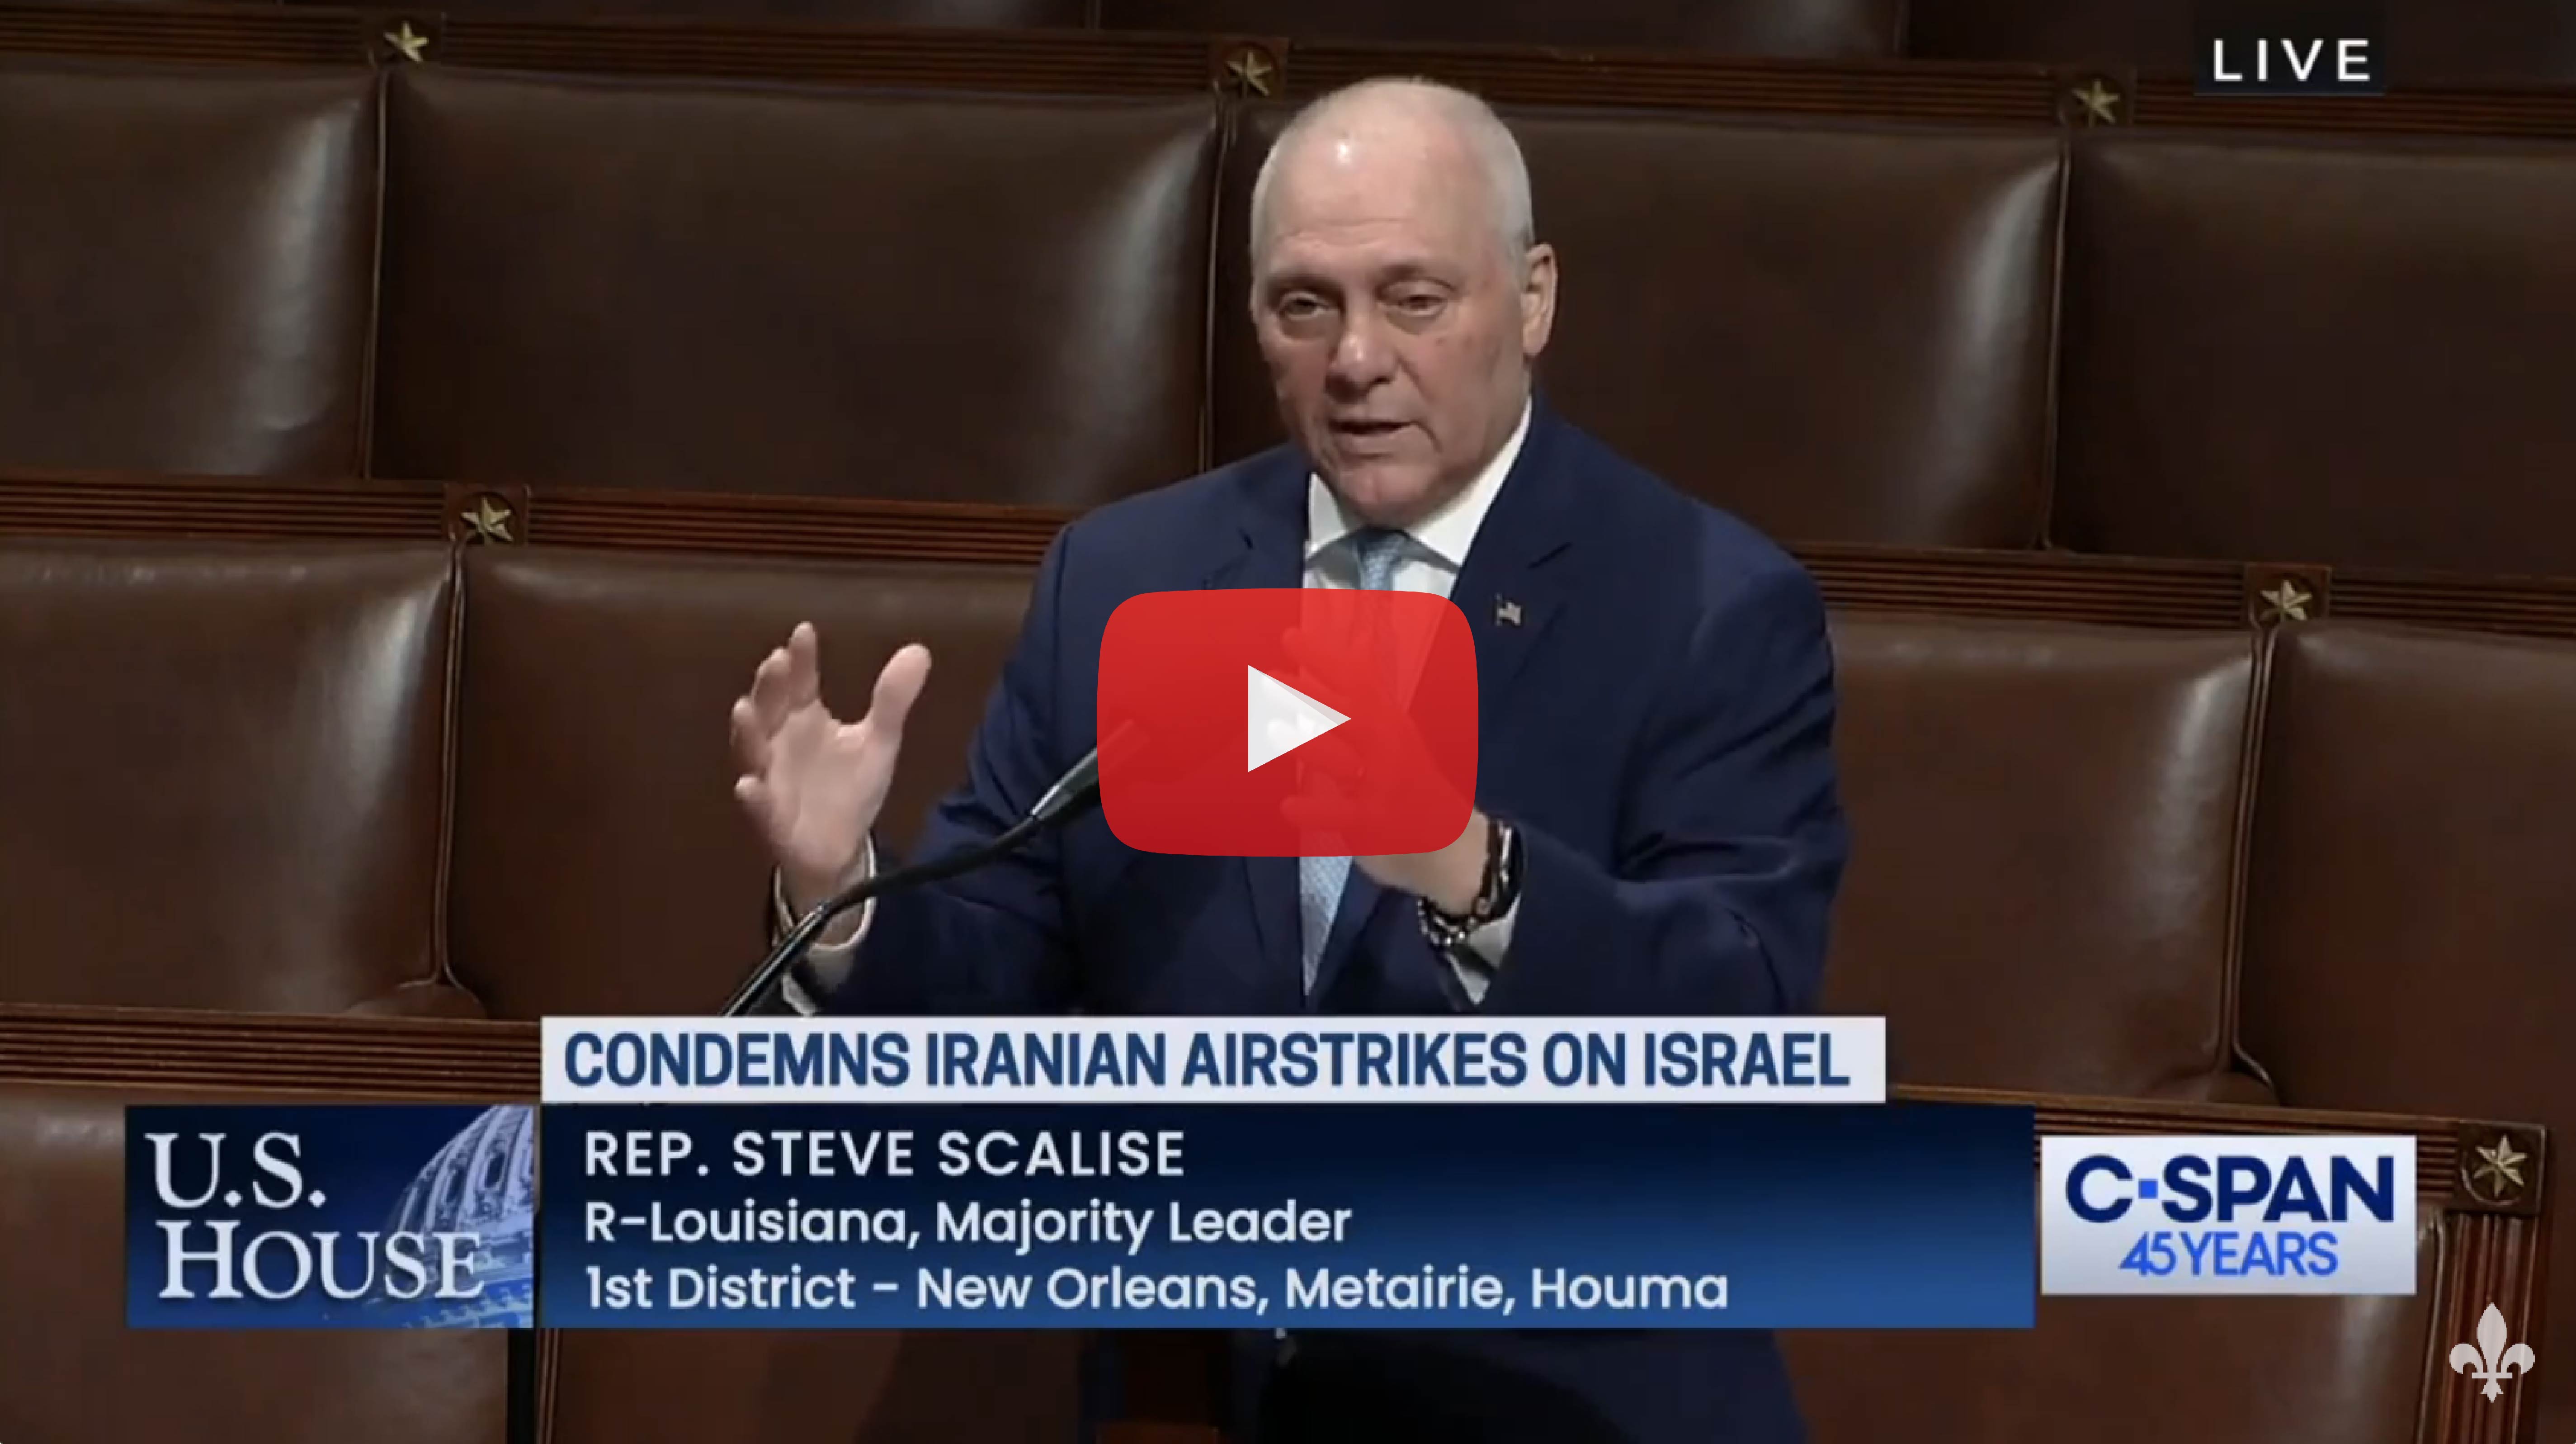 Scalise: House Republicans are Standing with Israel Against Evil